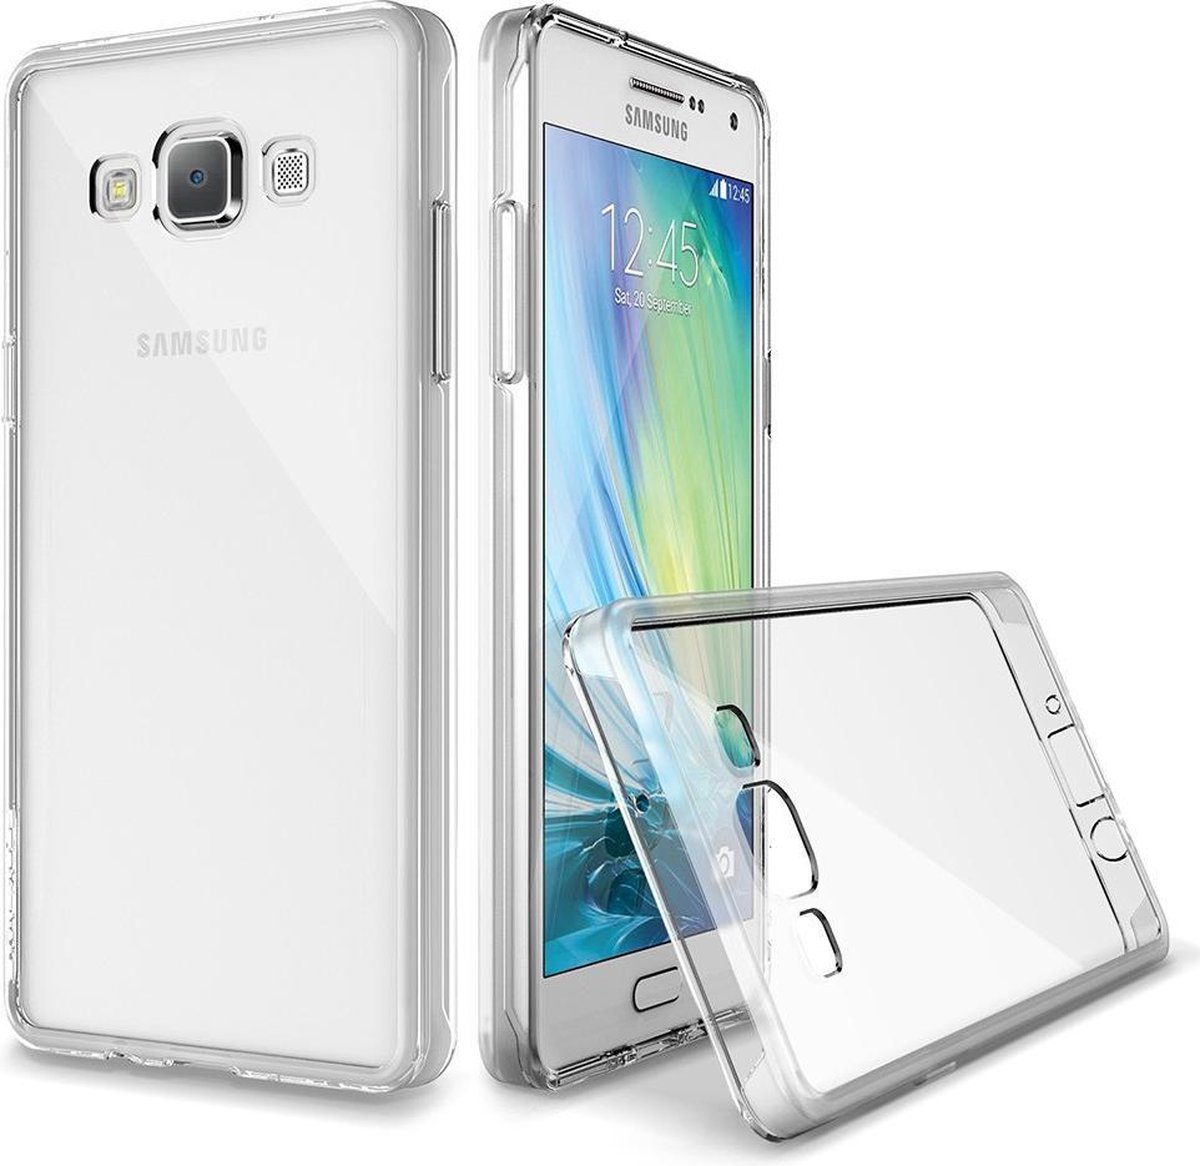 OuCase Galaxy A7 Ultra thin Siliconen Gel TPU Hoesje / Case/ Cover Transparant Naked Skin